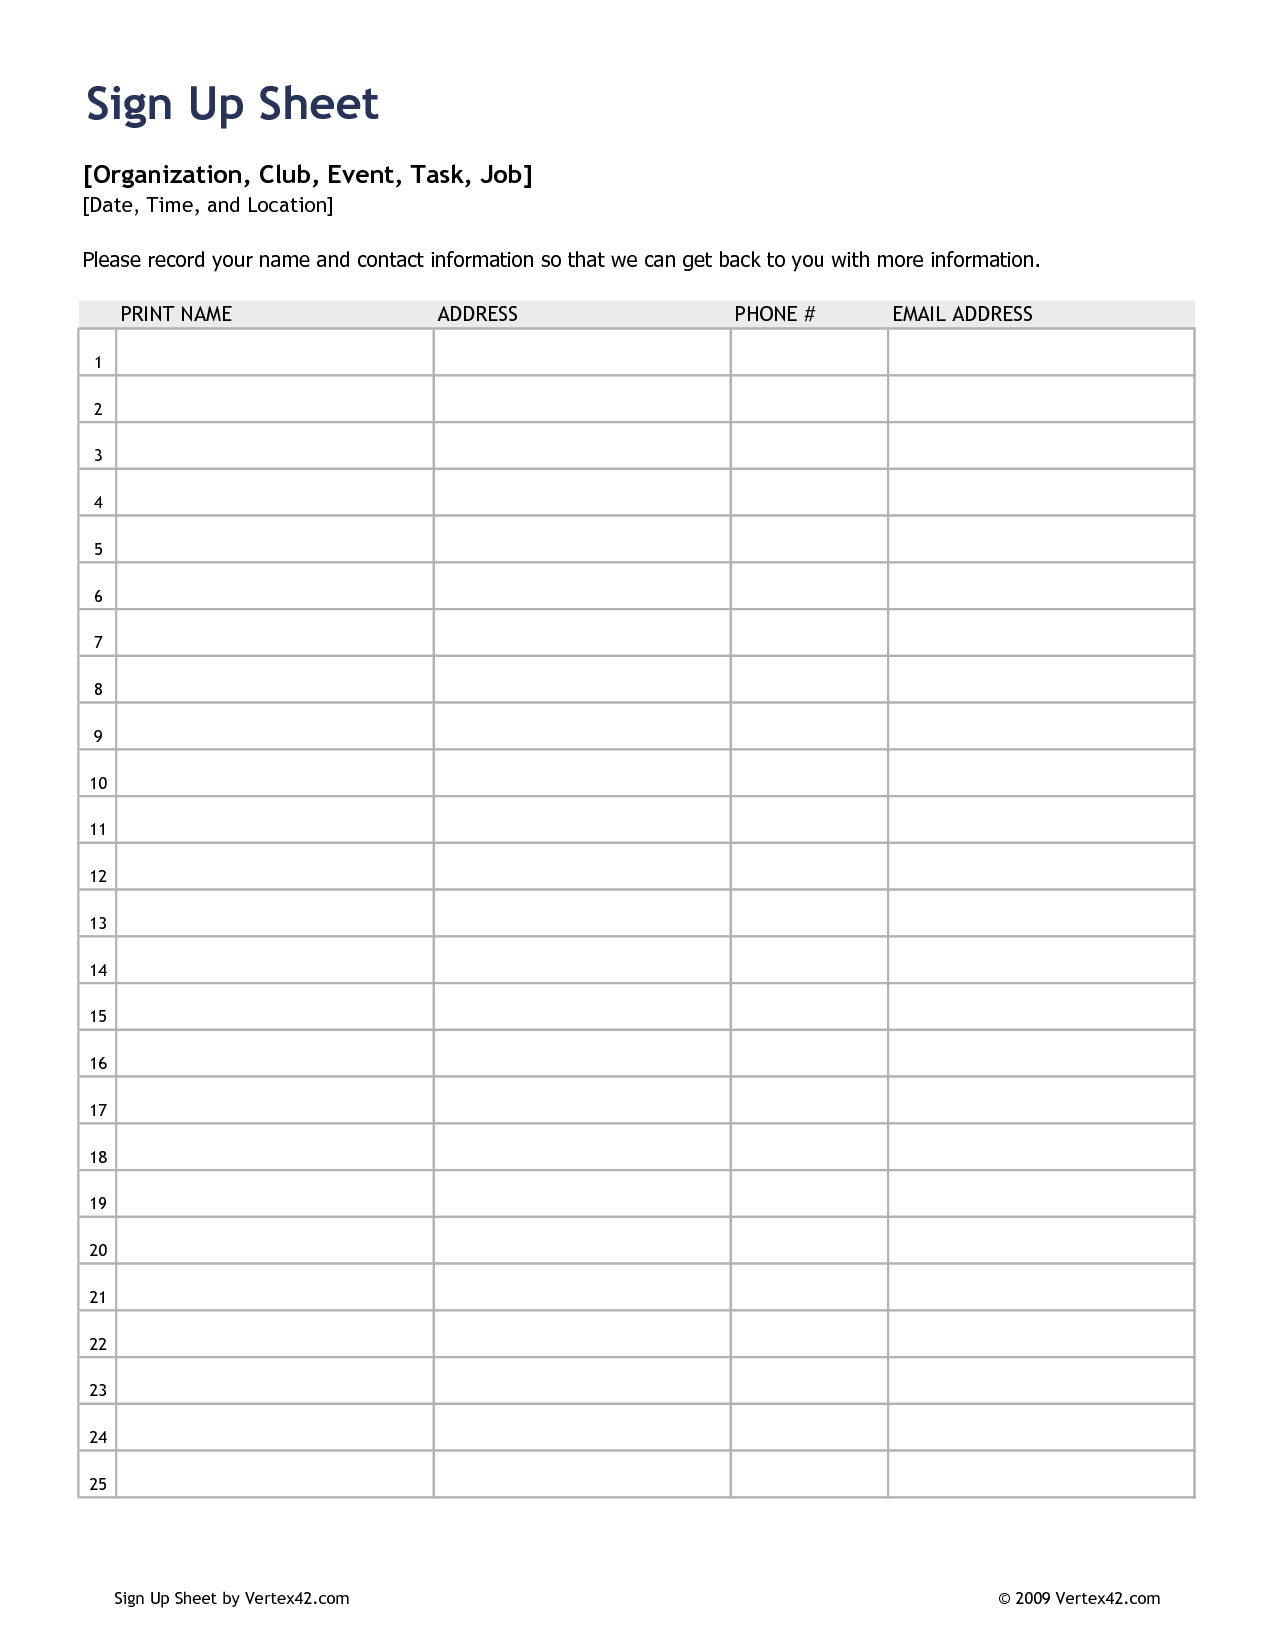 5-best-images-of-sign-in-sheet-template-printable-free-sign-up-sheet